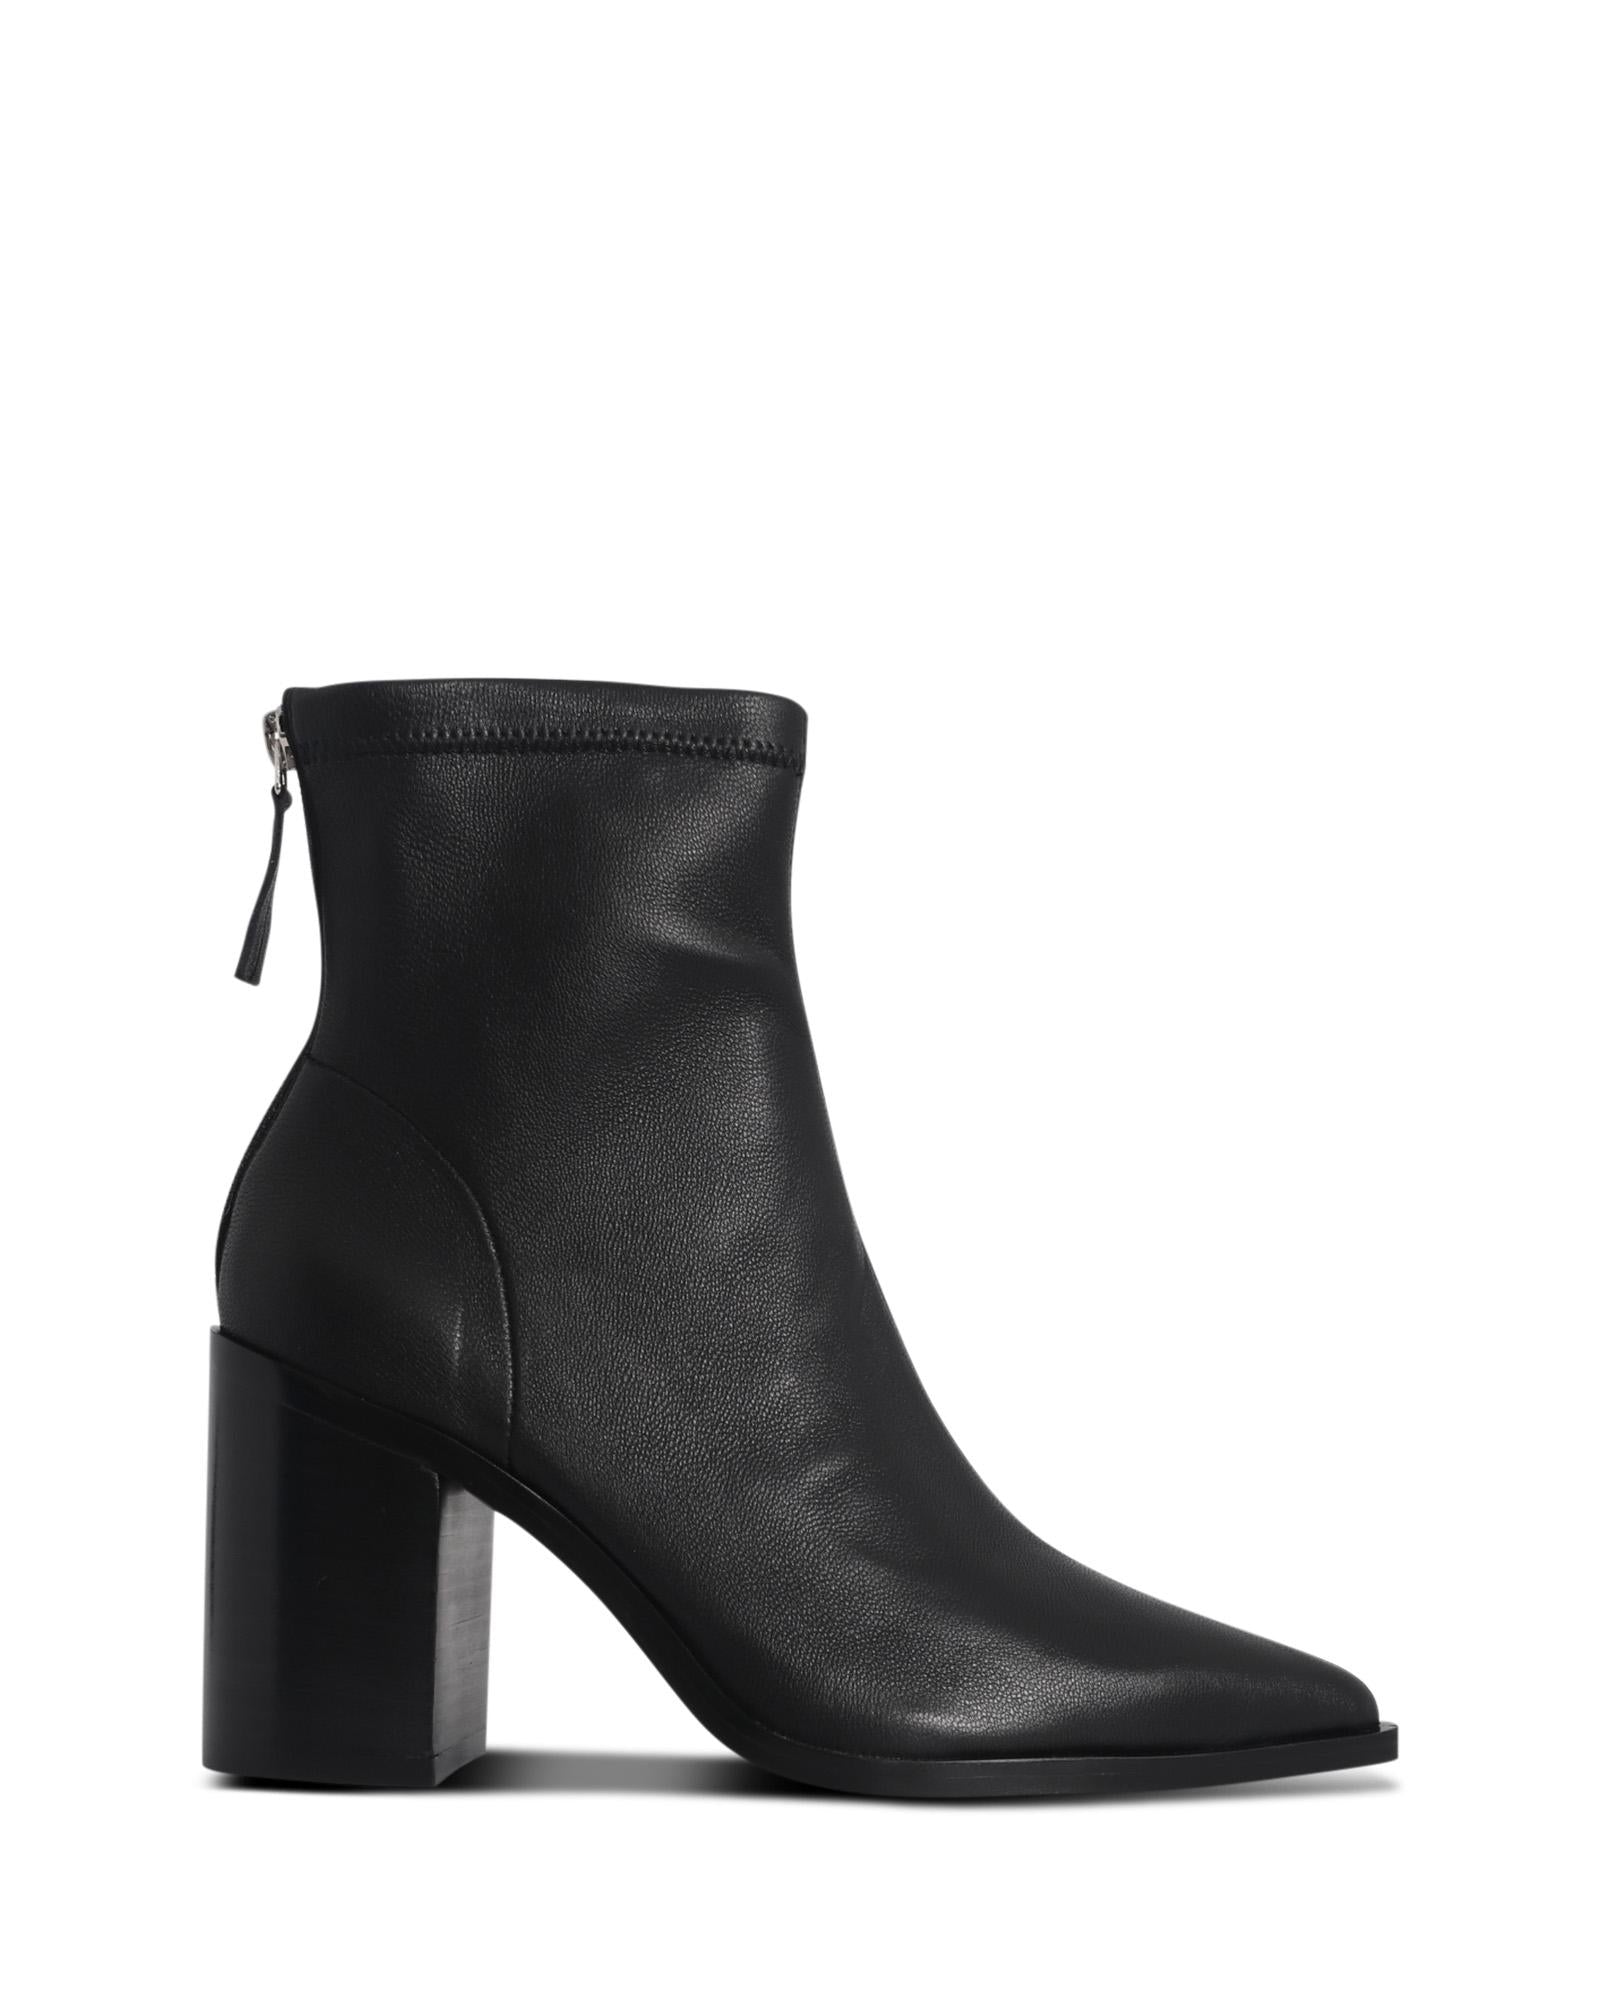 Saylor Black 9cm Block Heel Ankle Boot with Point Toe